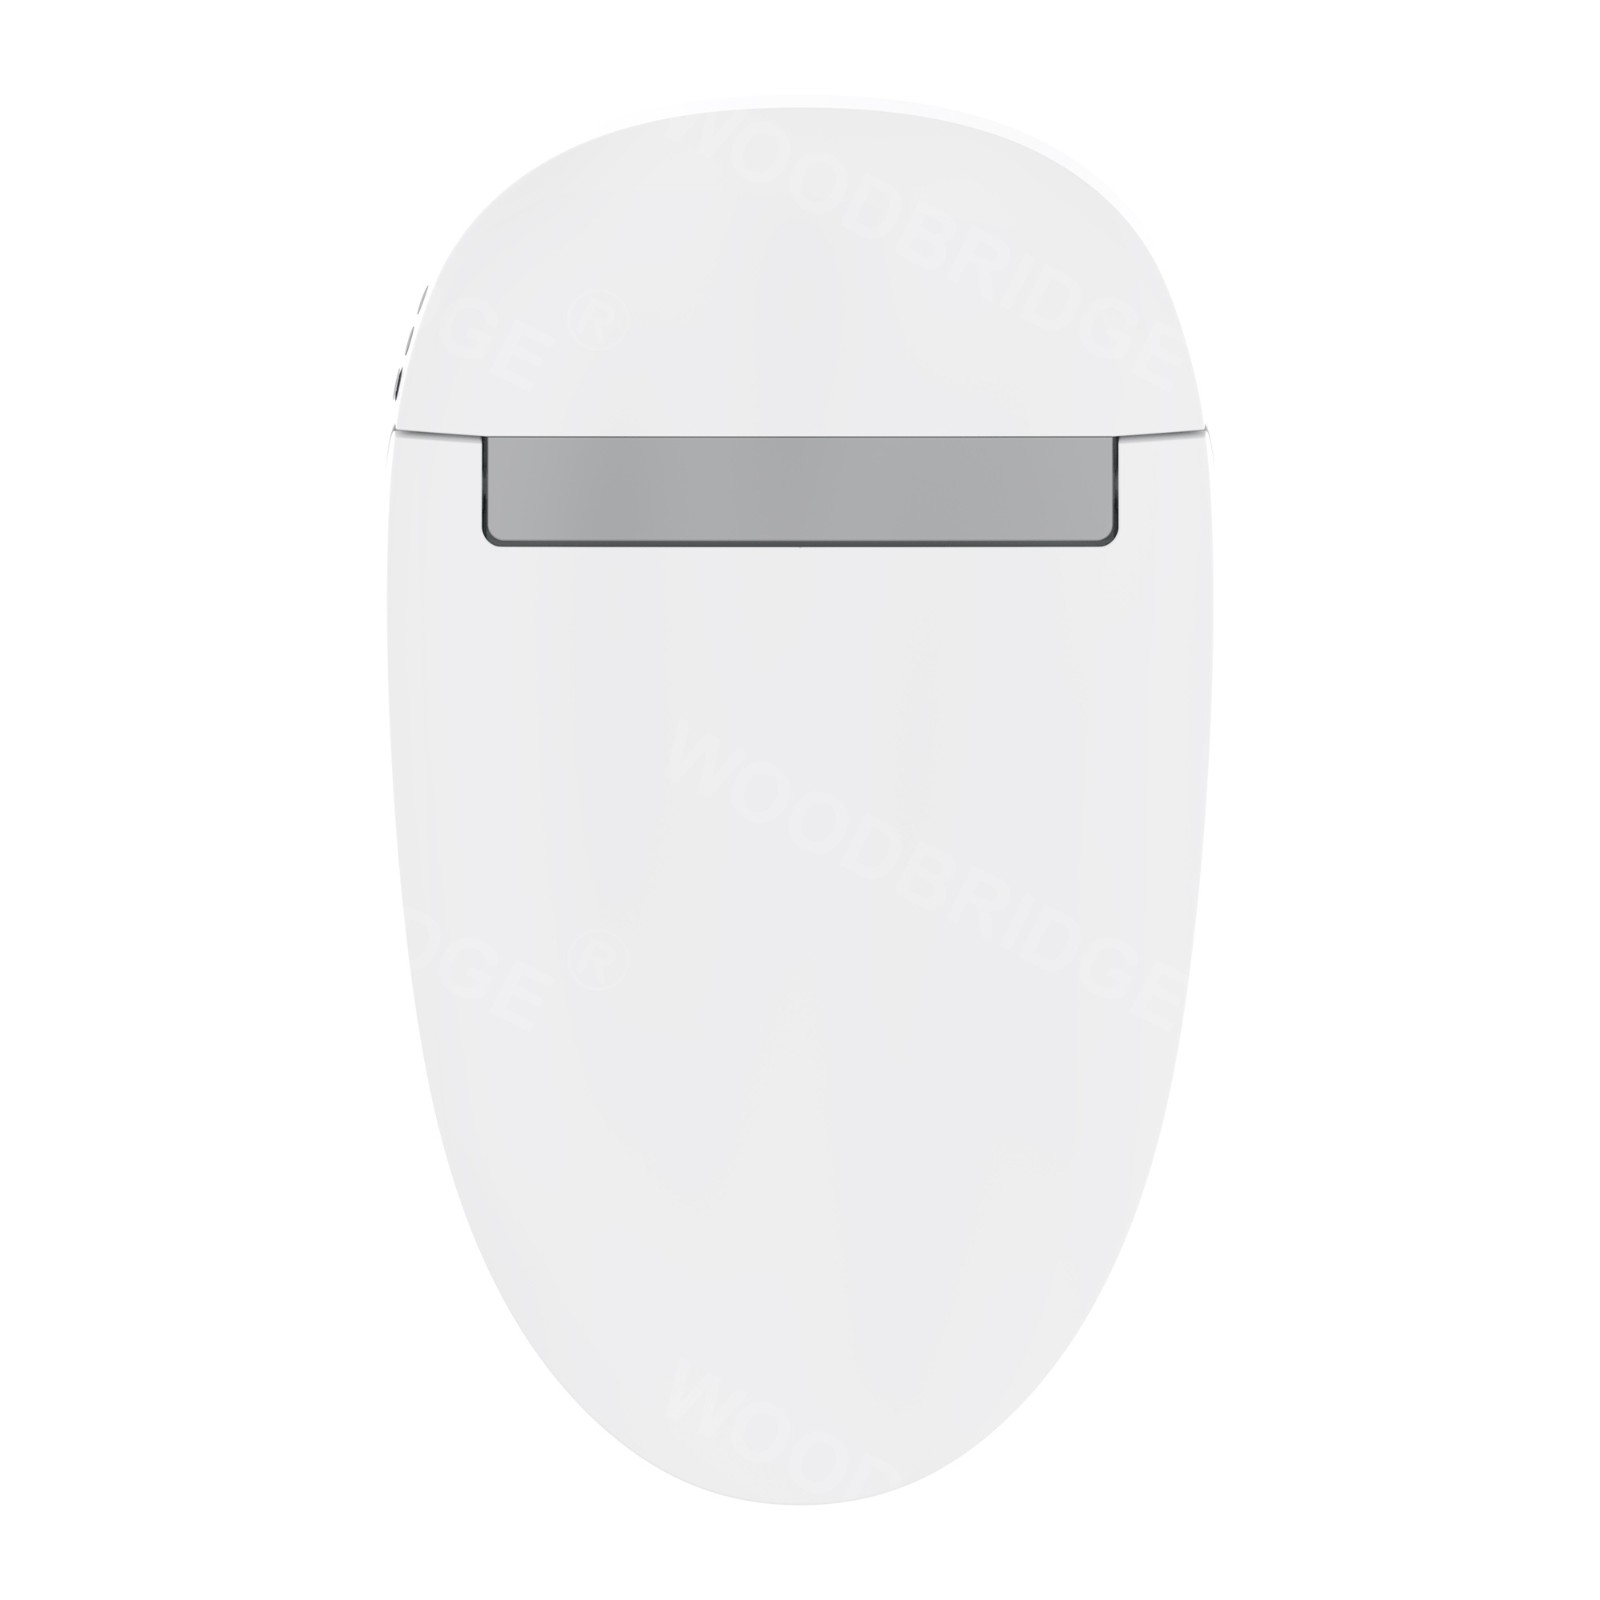  WOODBRIDGE BW5100S One Piece Modern,Slim, Tankless and High Efficiency Toilet with Battery Operated Auto Flushing_5056